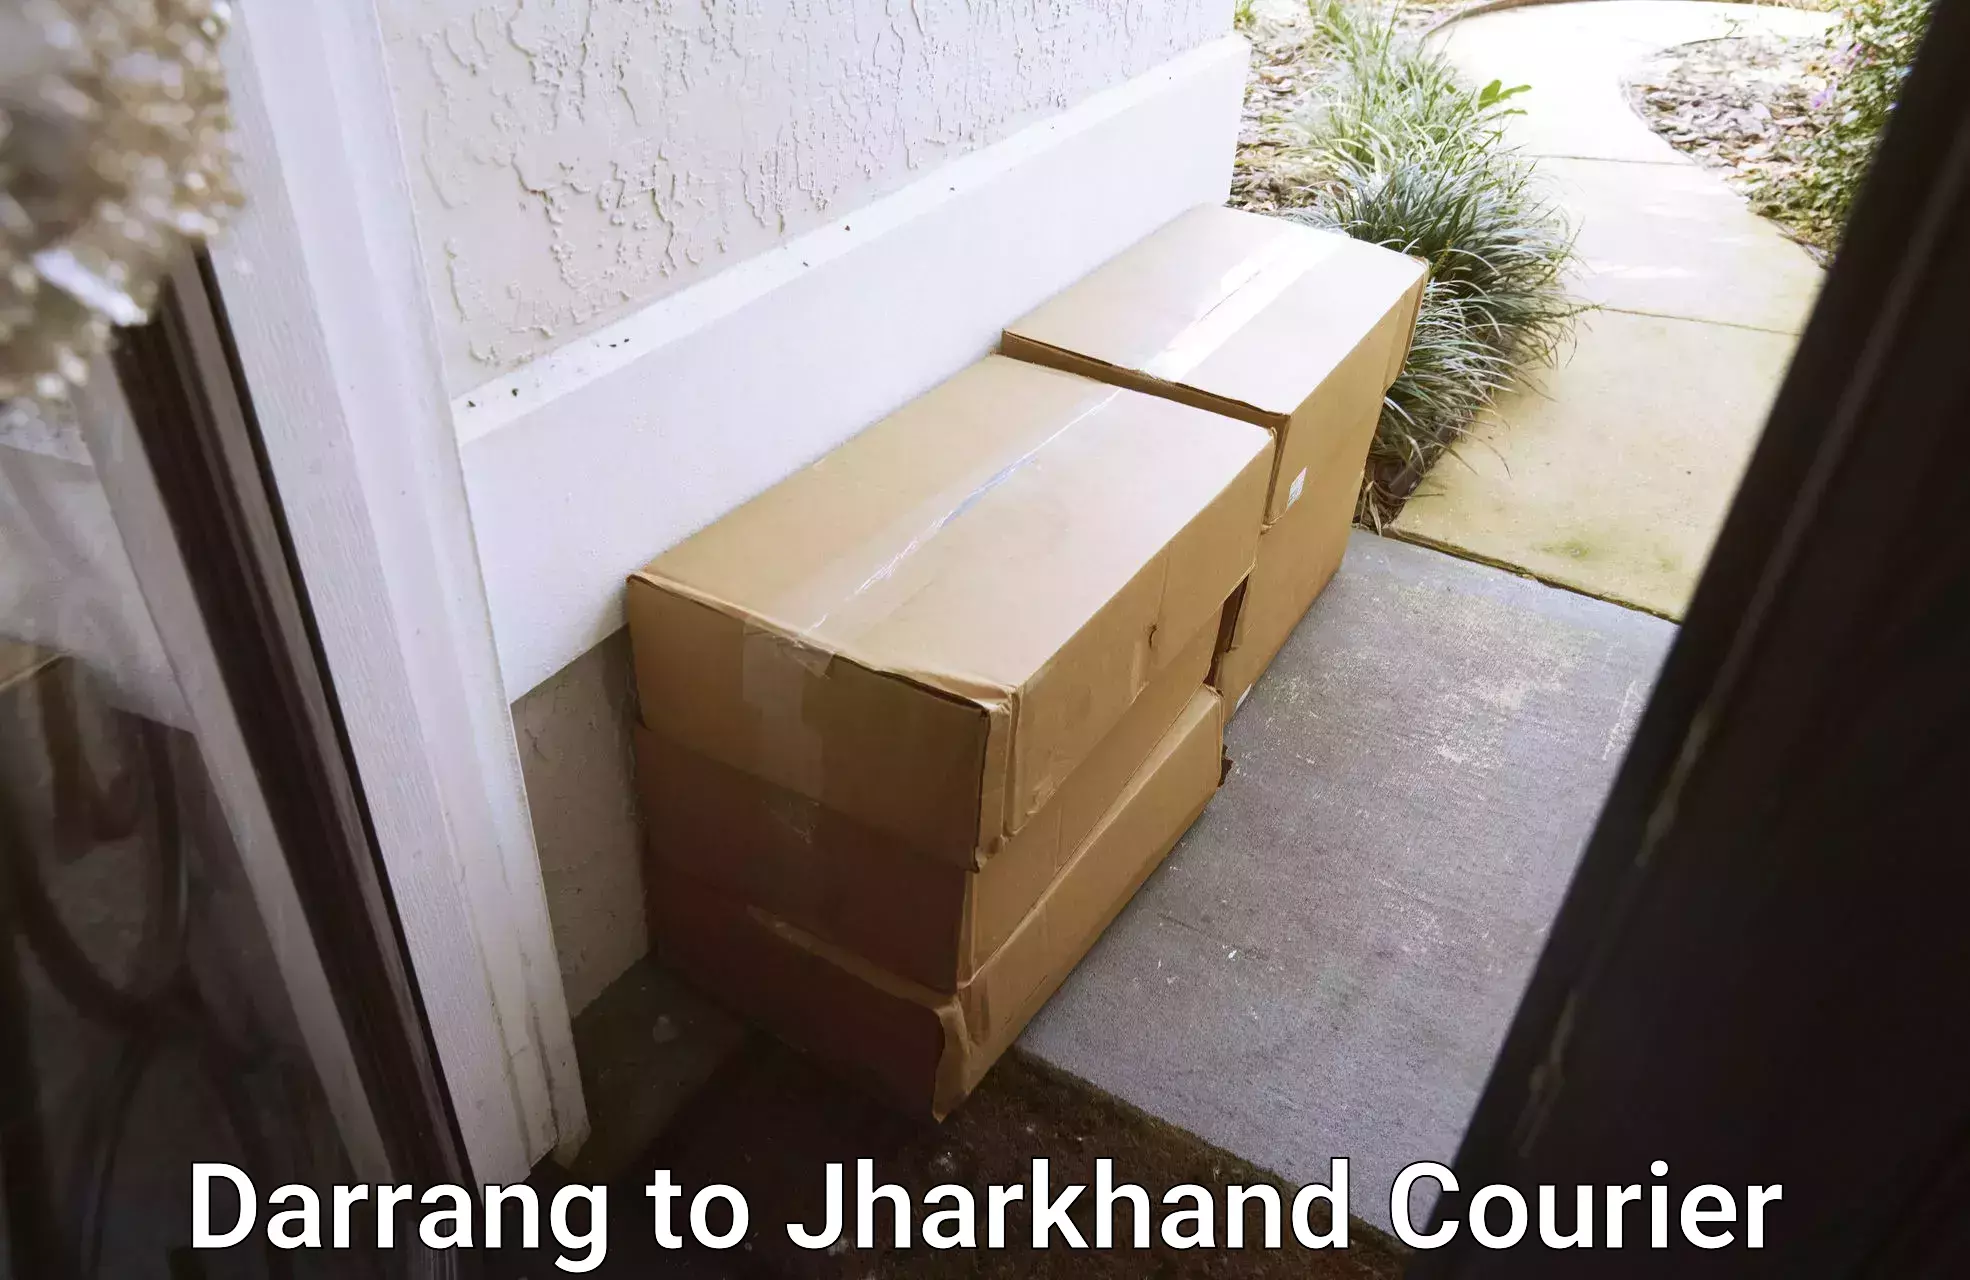 Courier service booking Darrang to Chakradharpur